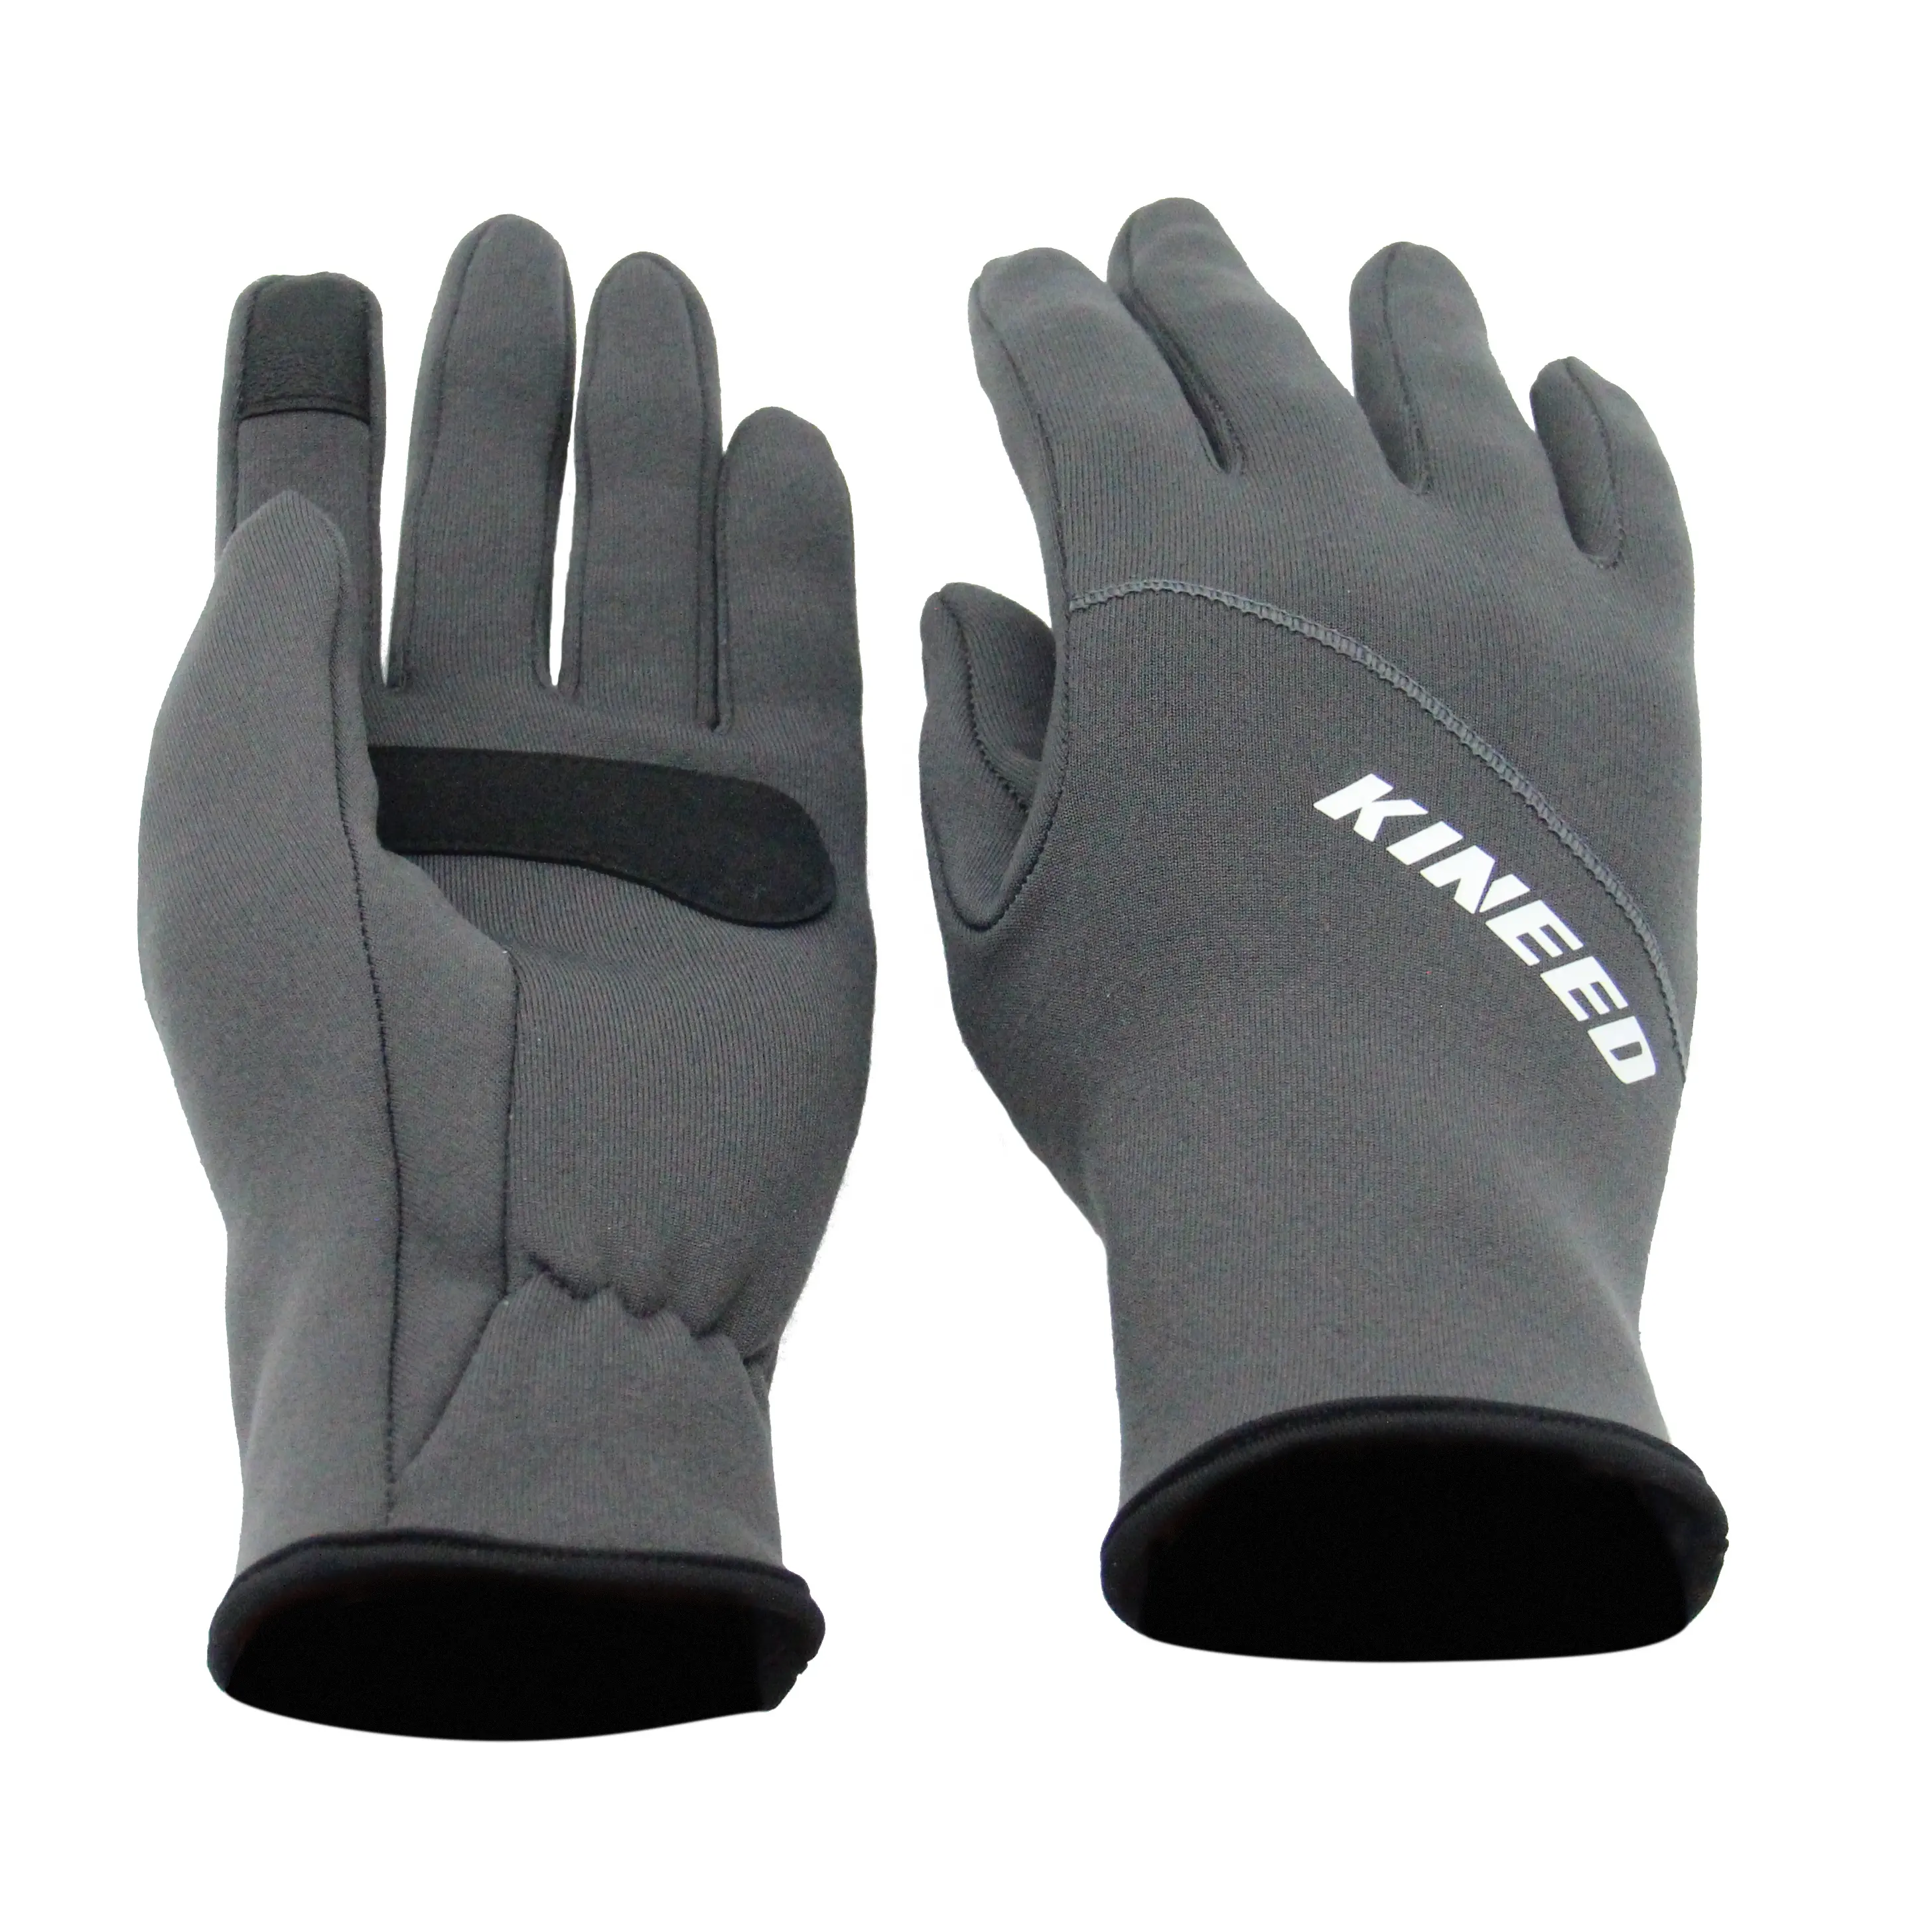 Ladies Full Finger Thin Cycling Riding Driving Screen Touch Climbing Glove Bike Hand Gloves Winter